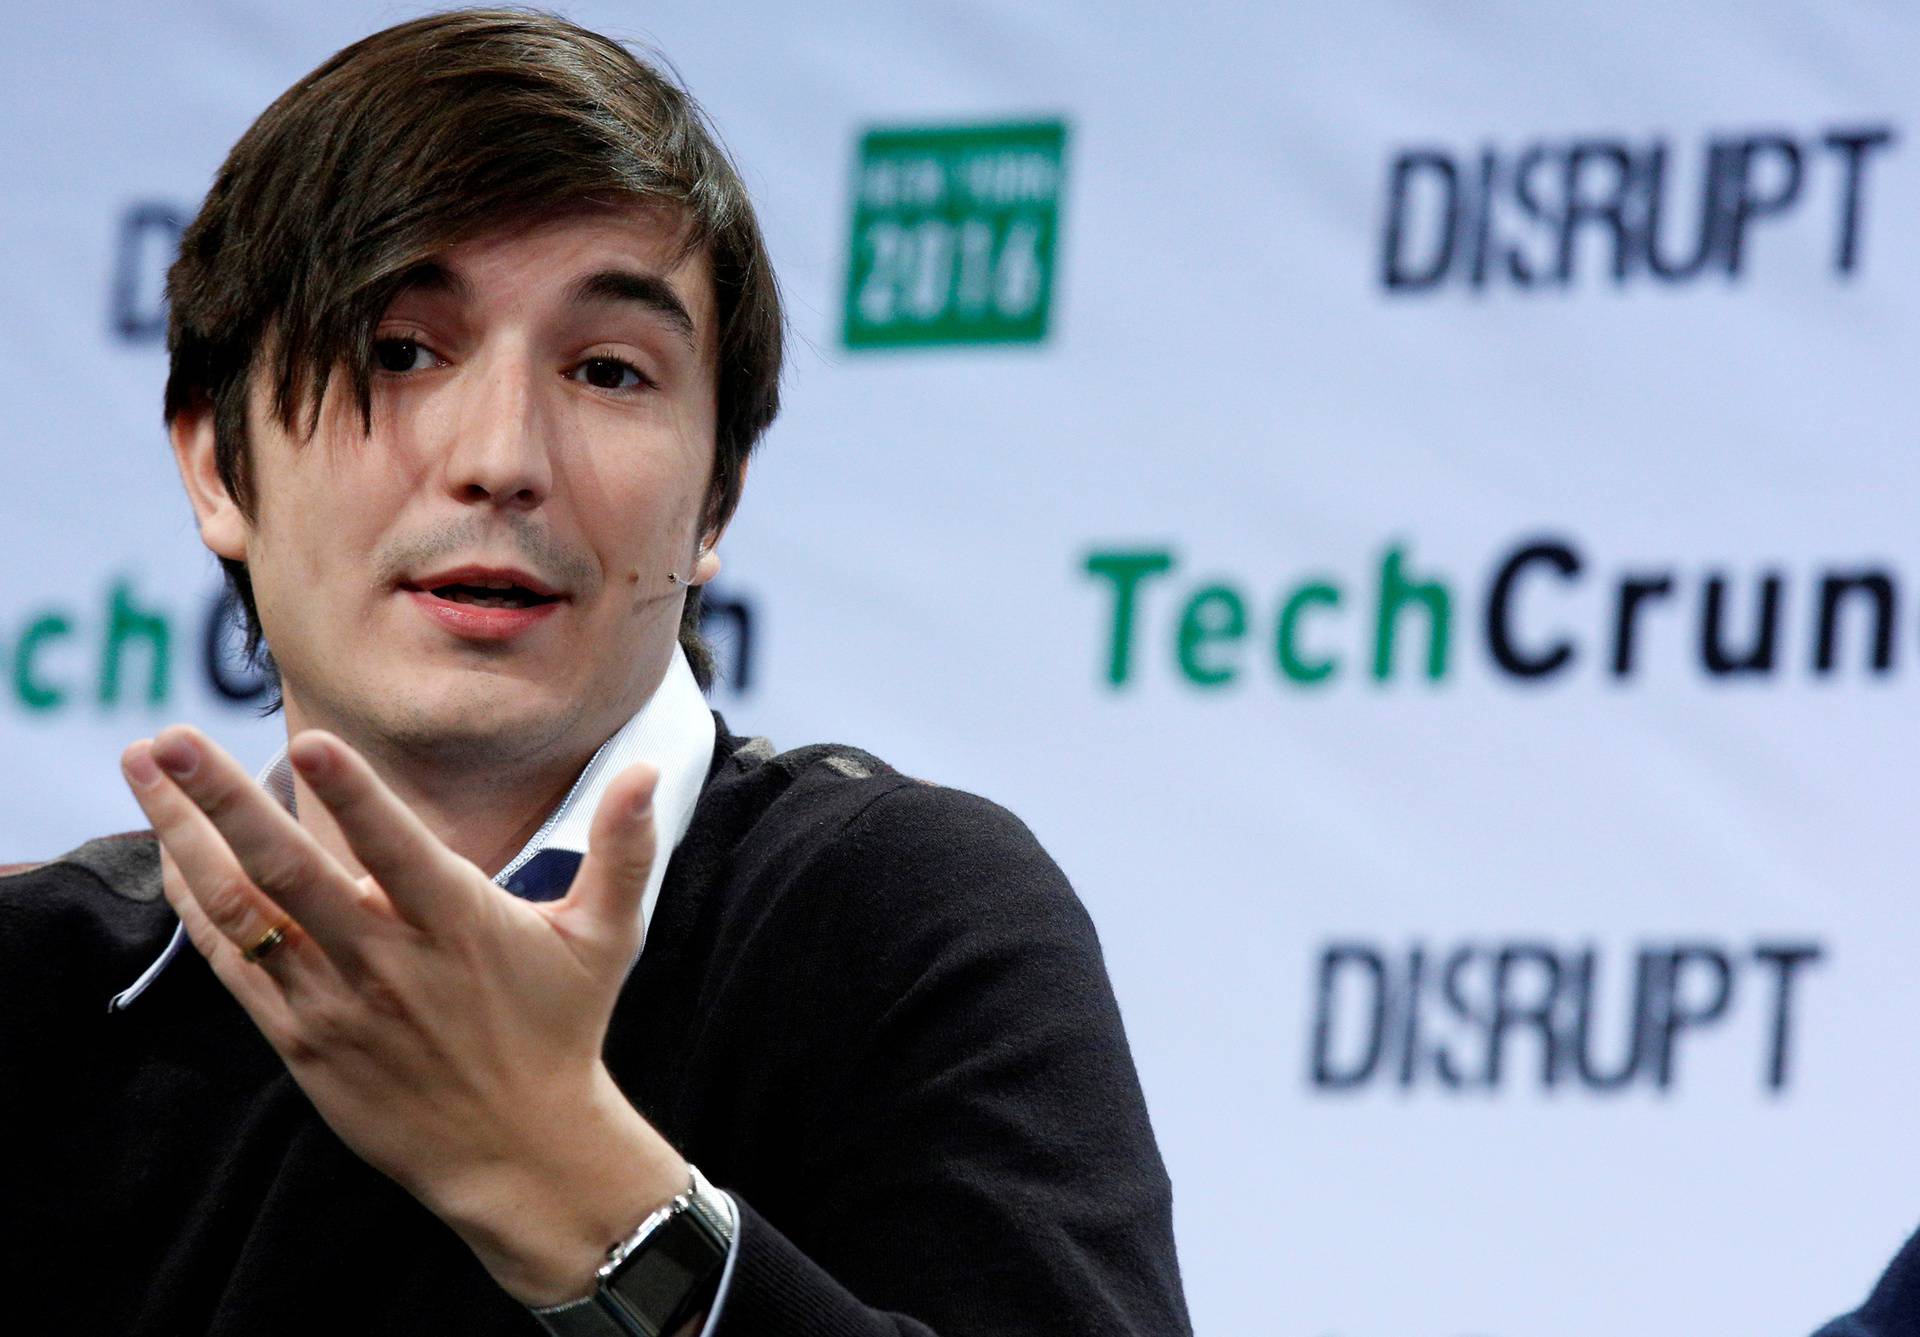 FILE PHOTO: Vlad Tenev, co-founder and co-CEO of investing app Robinhood, speaks during the TechCrunch Disrupt event in Brooklyn borough of New York